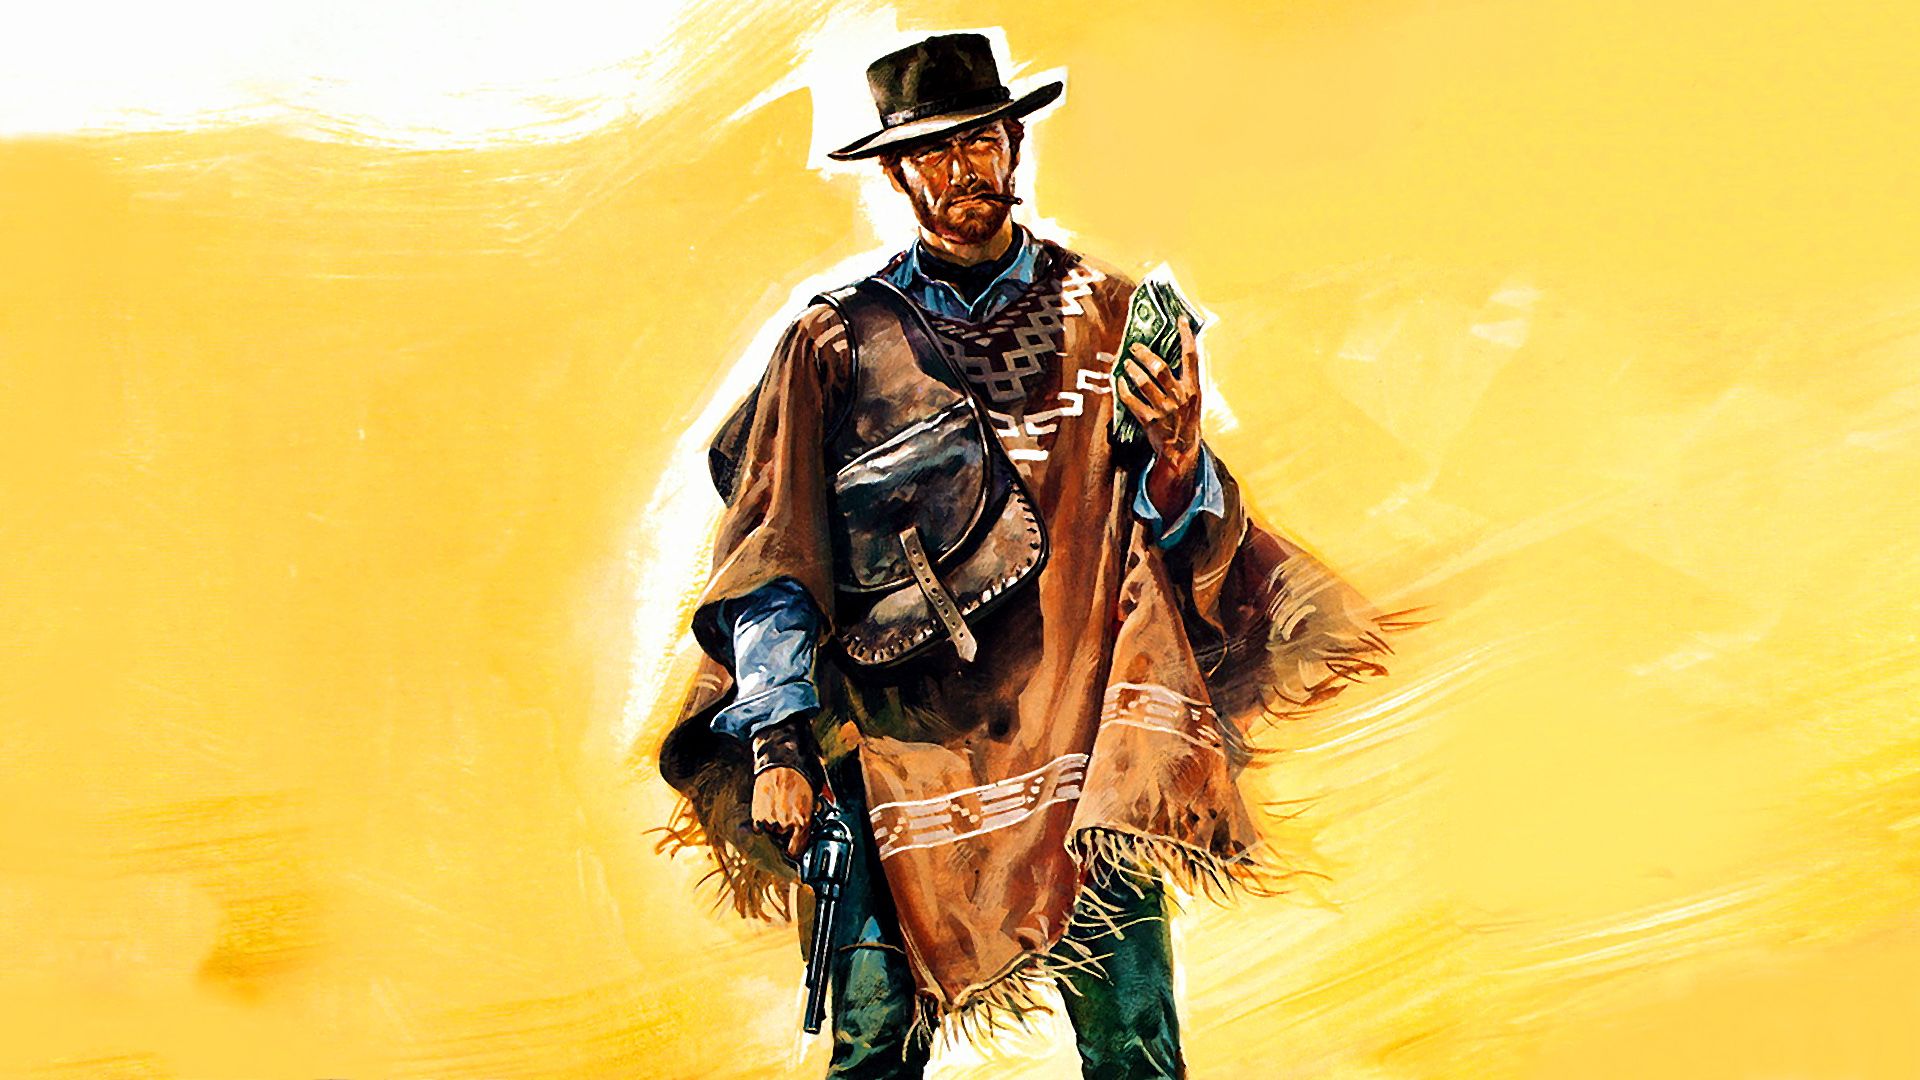 A Fistful of Dollars background